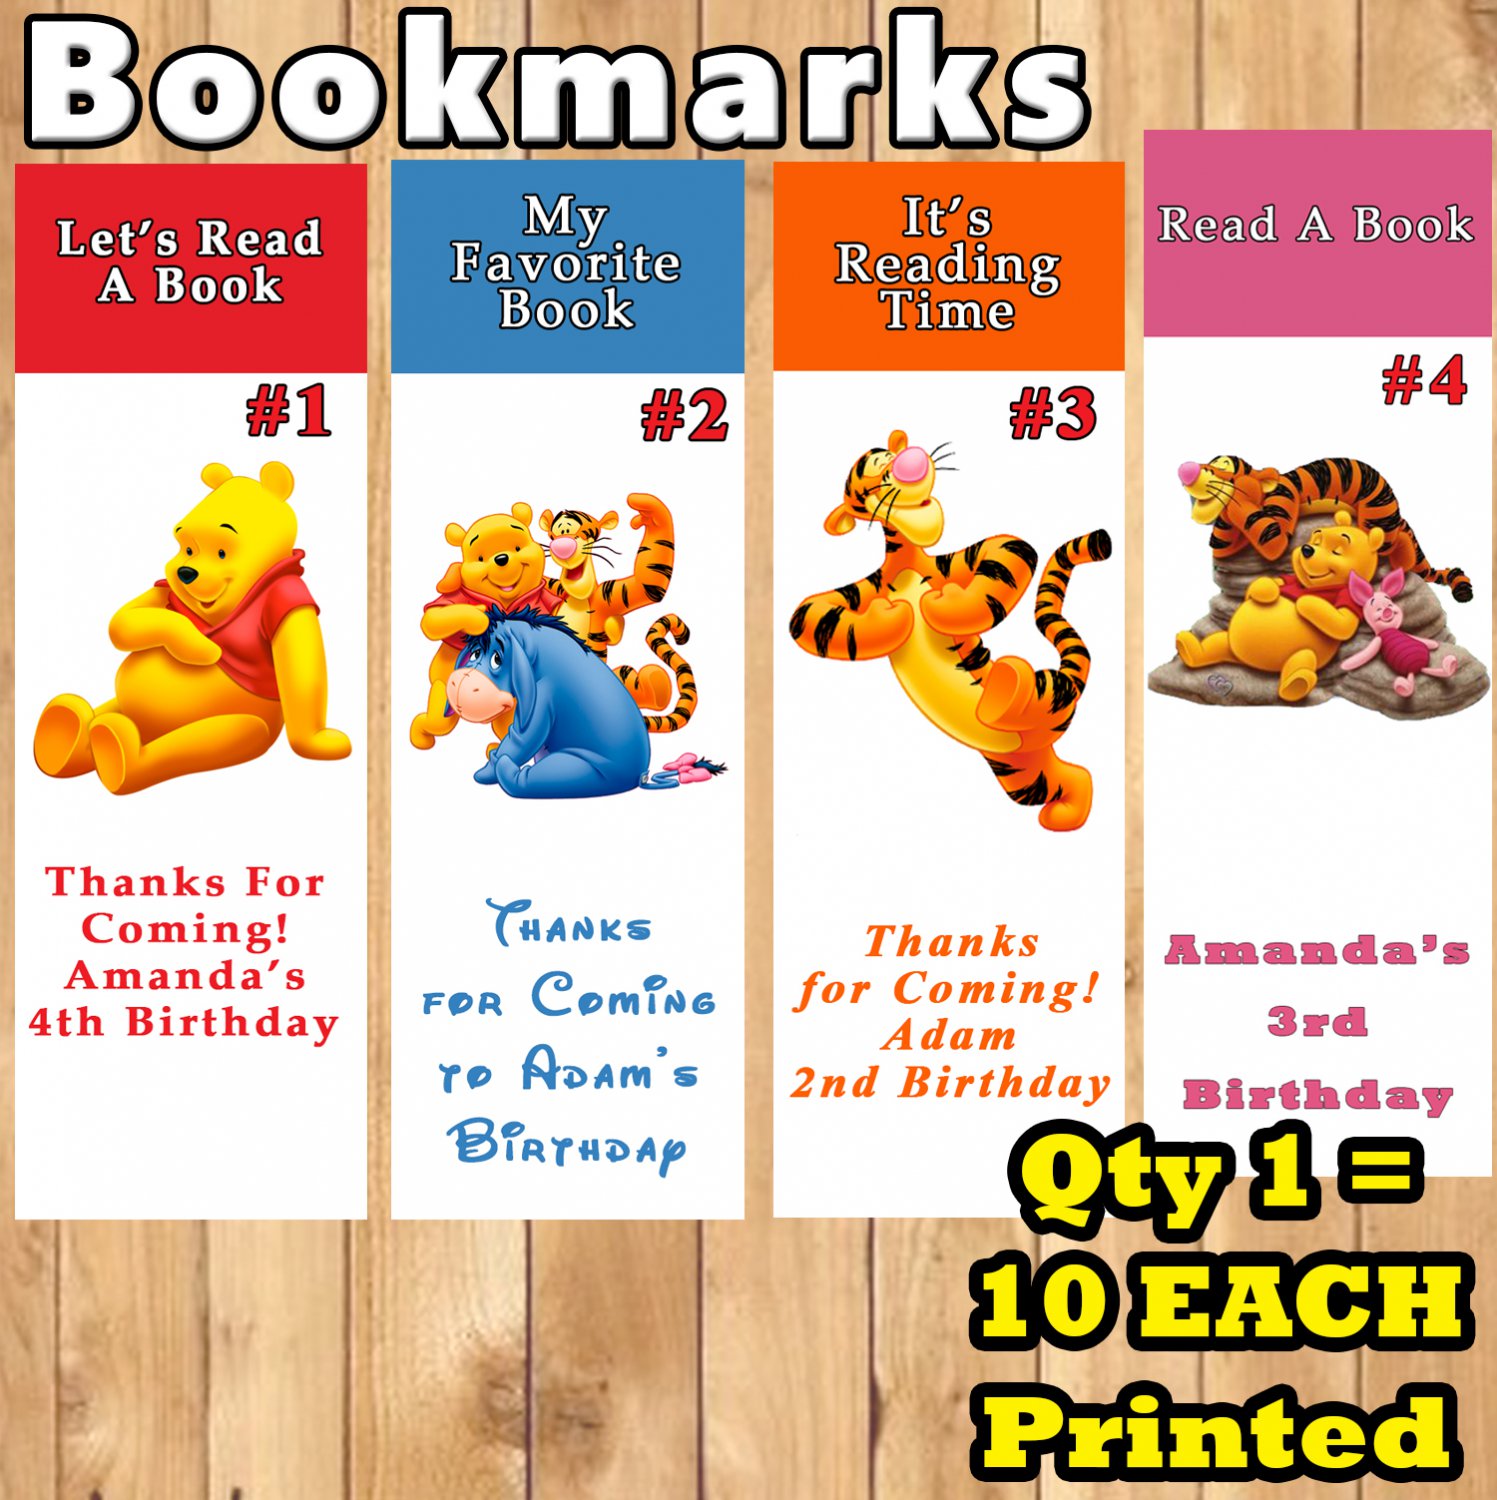 Pooh Bear Winnie The Pooh 10 ea Favor Bookmarks Personalized